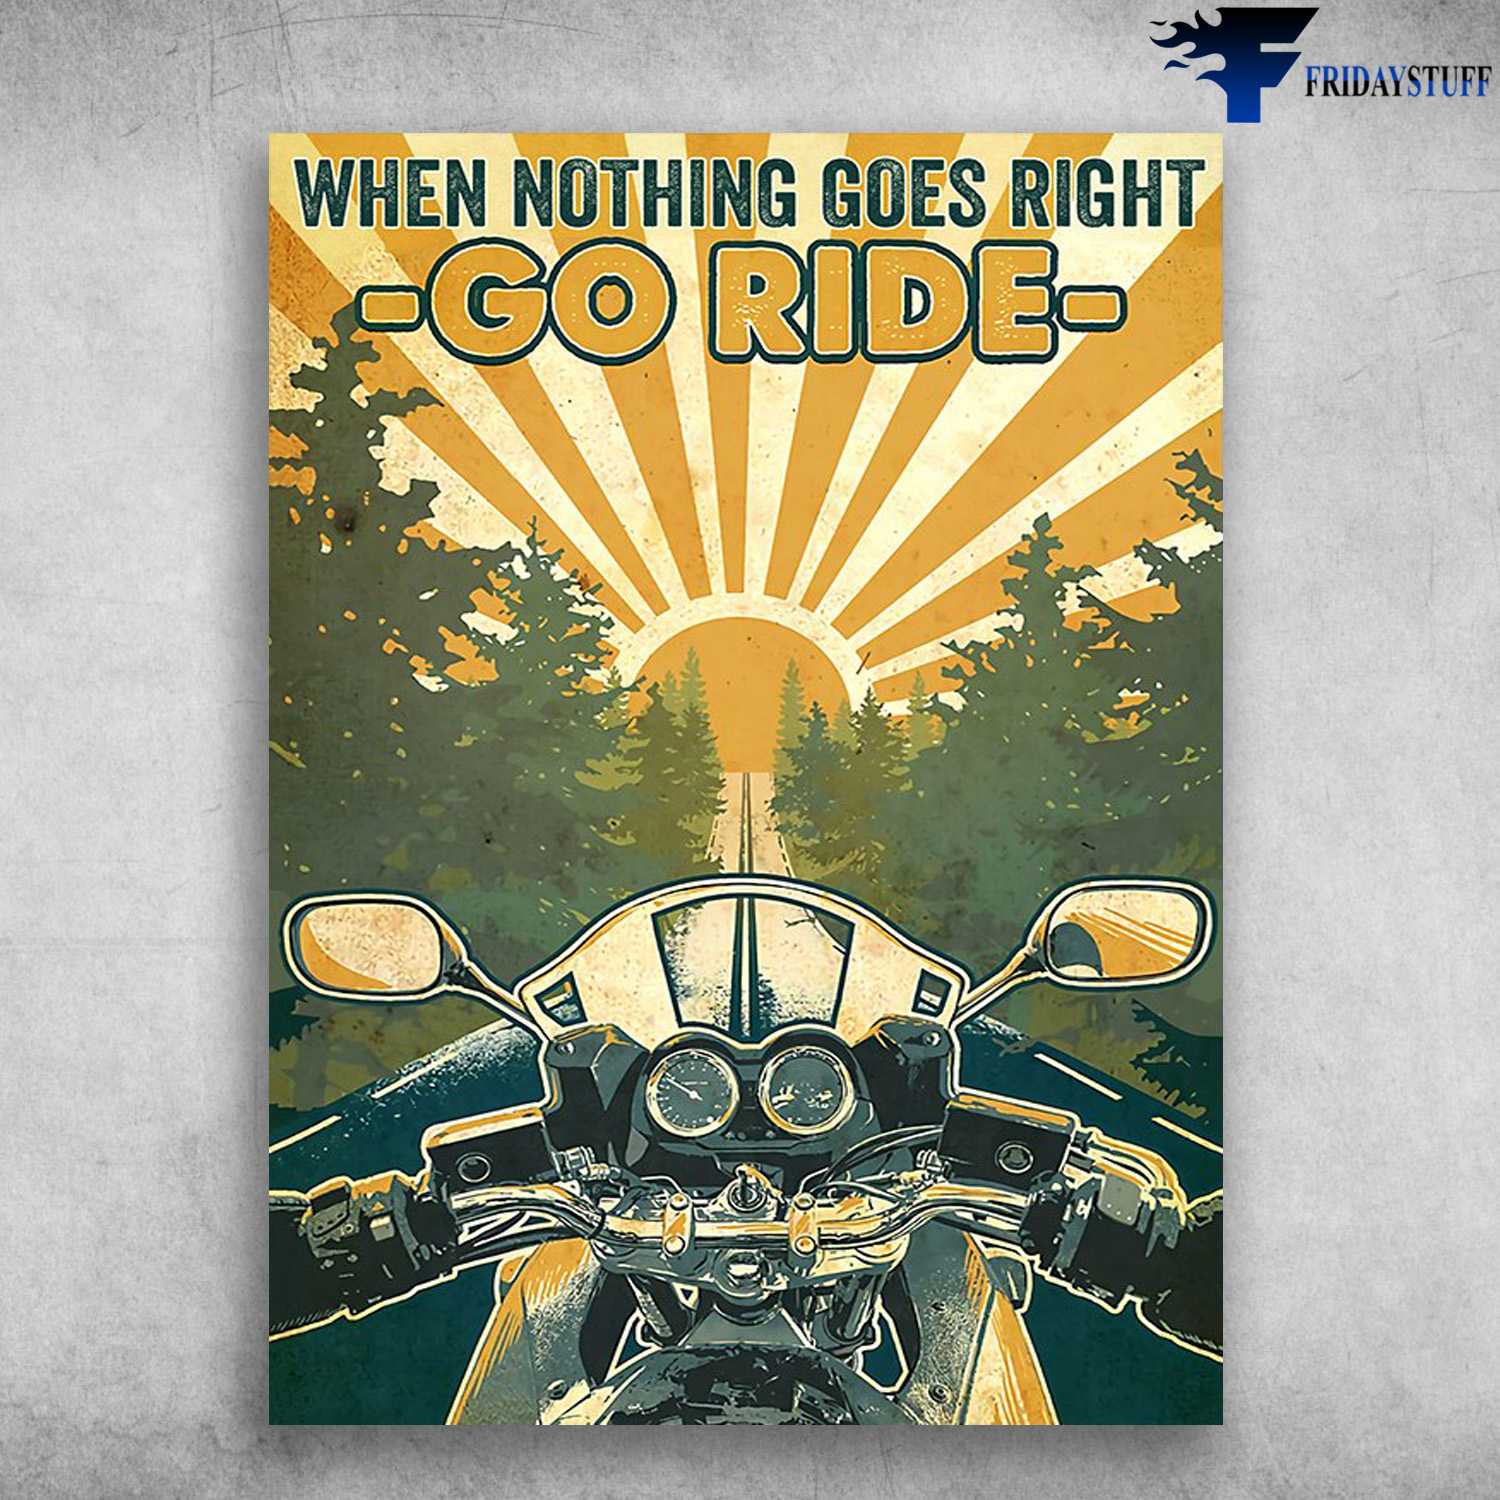 Rider Poster, Motorcycle Lover, When Nothing Goes Right, Go Ride